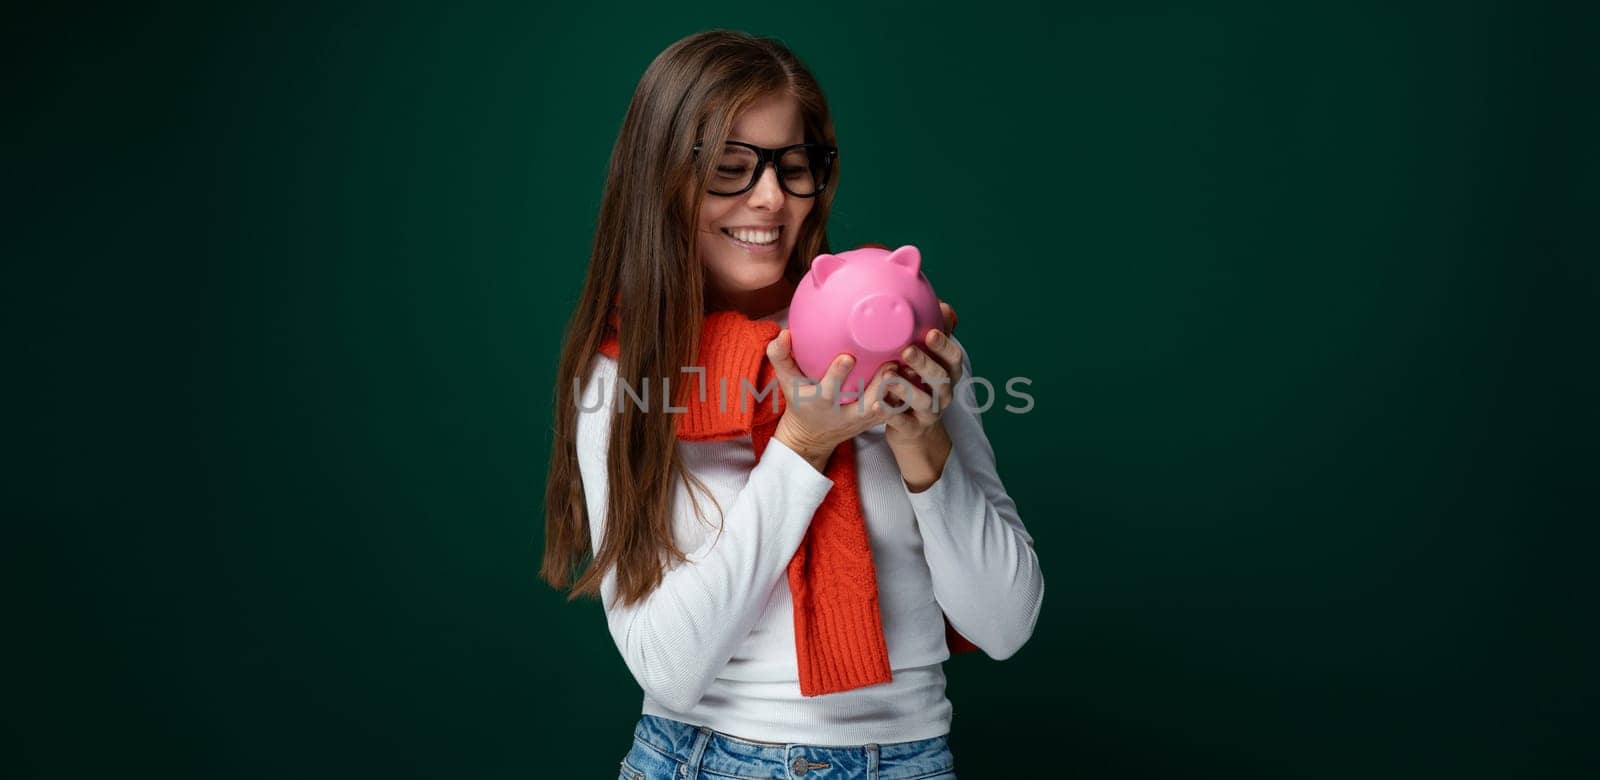 A young woman with brown hair dressed in a white turtleneck protects her savings and stores them in a piggy bank by TRMK